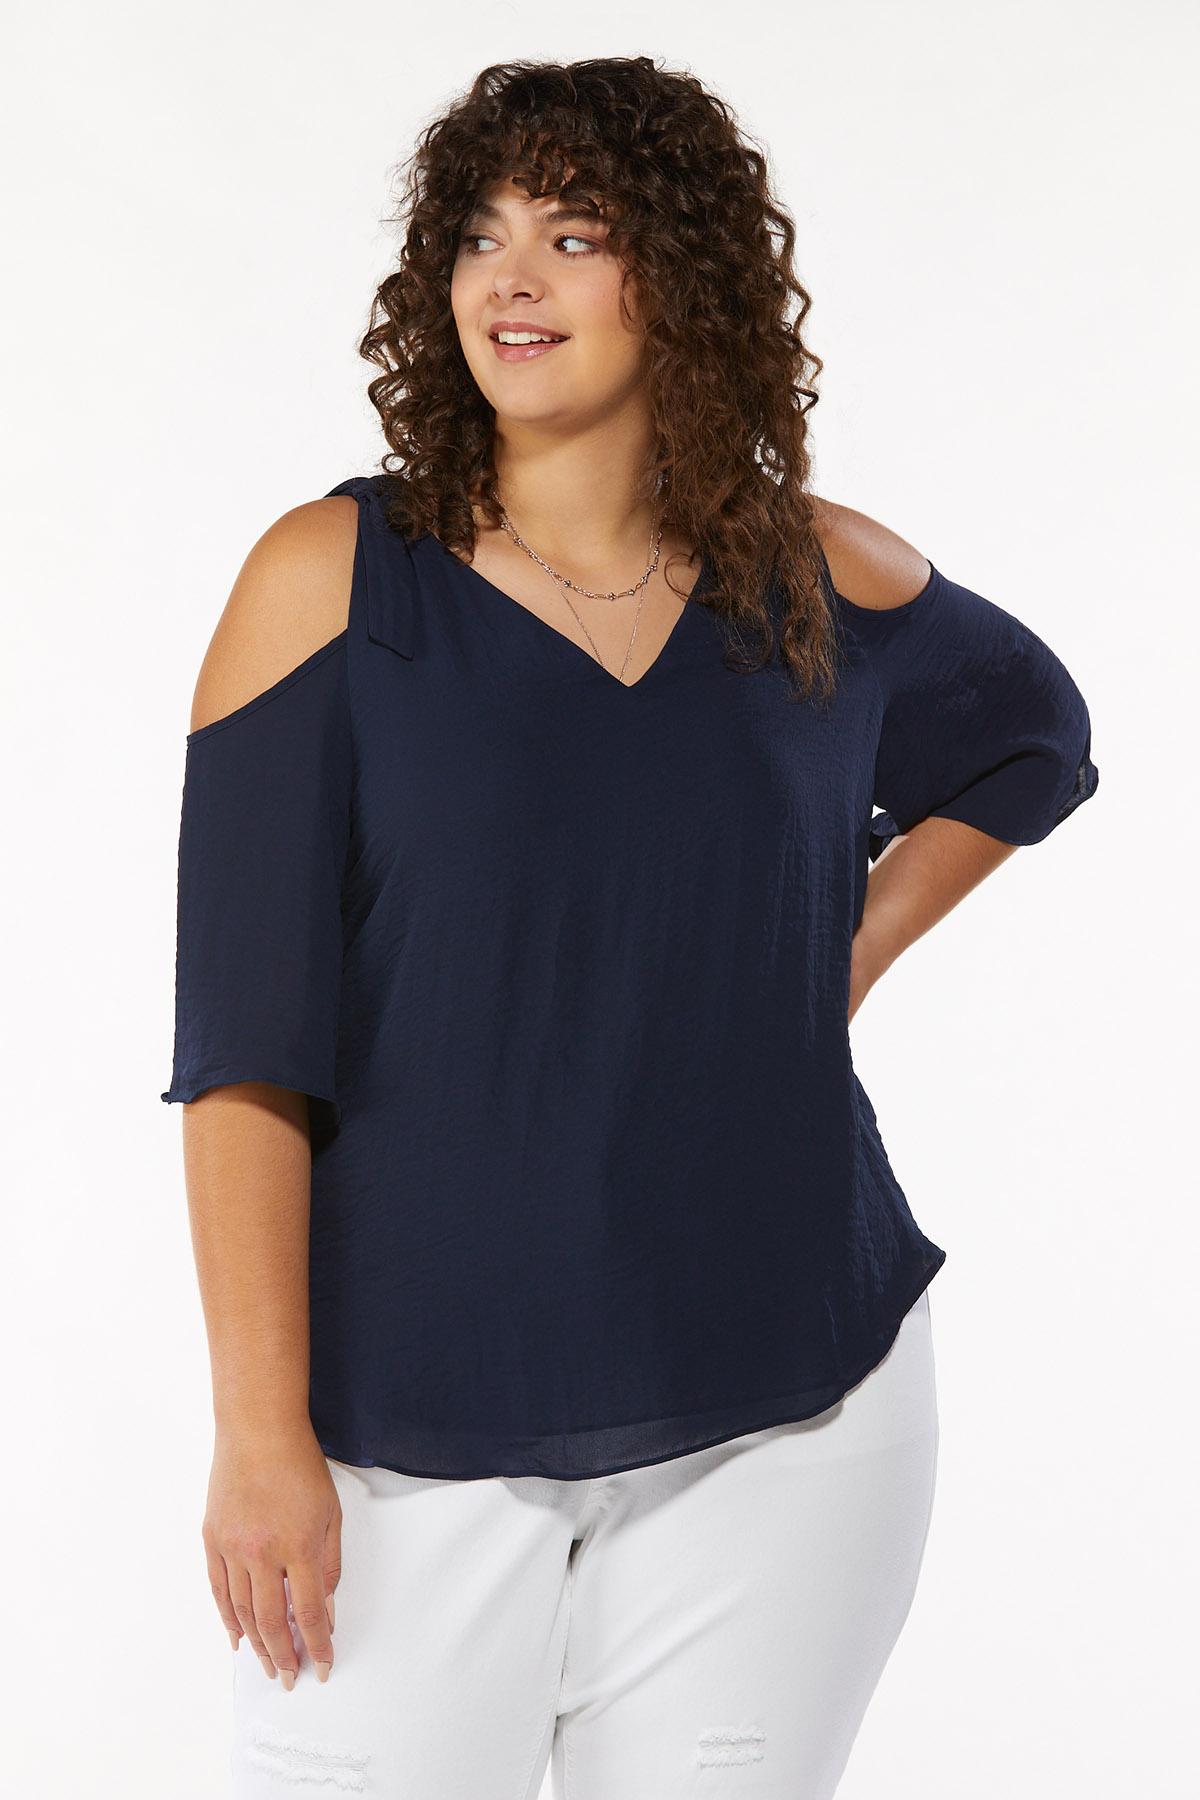 Plus Size Knotted Cold Shoulder Top